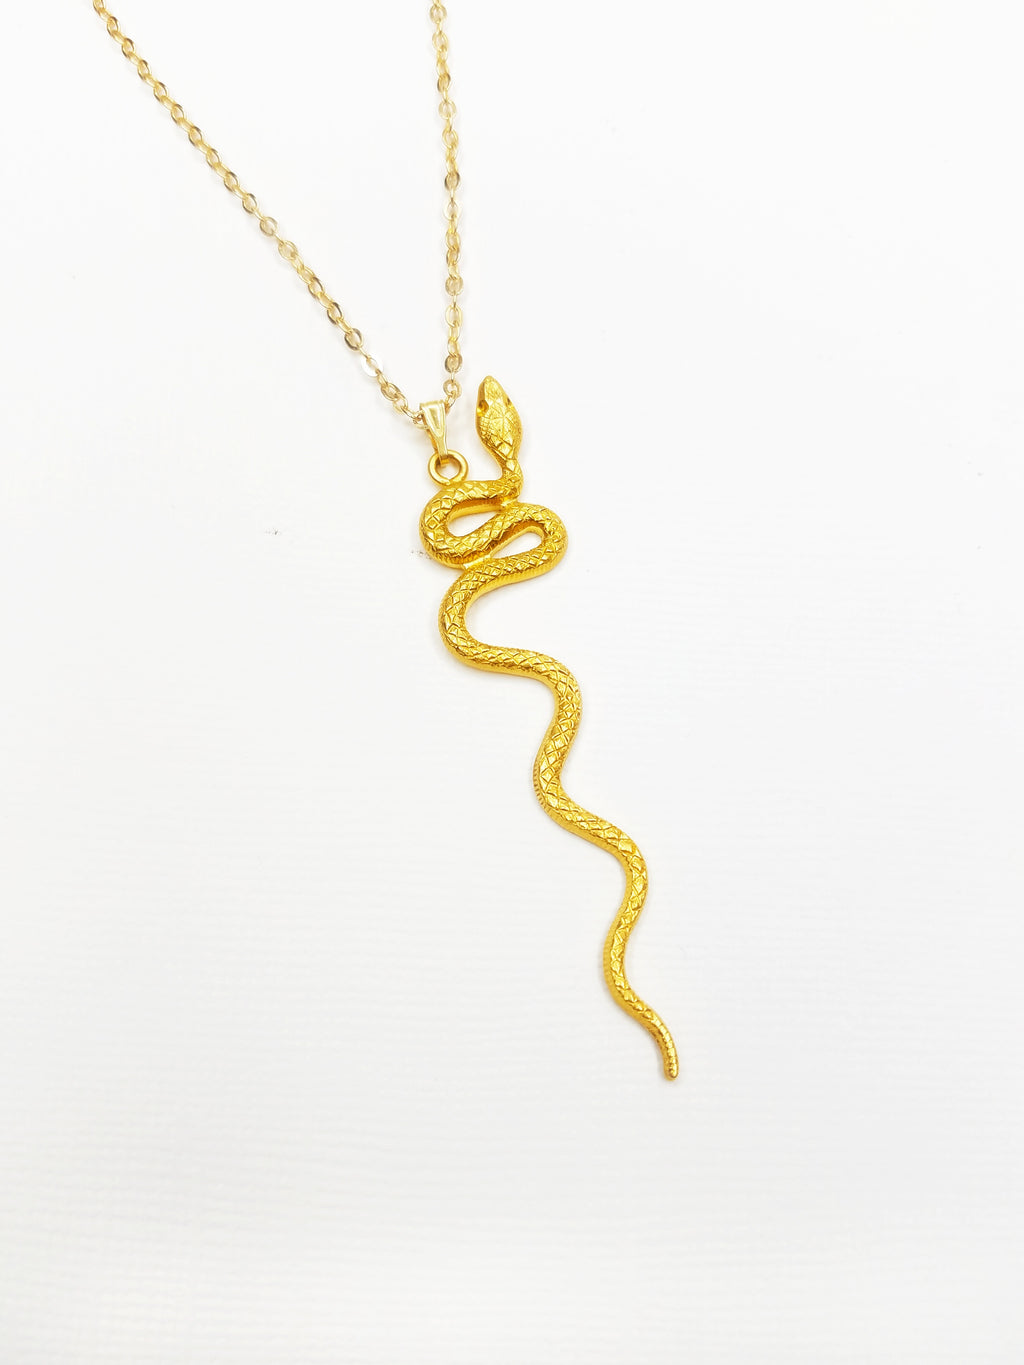 Necklace, Deco Snake, gold vermeil, with gold filled cable chain. Made by Billie Lorraine 